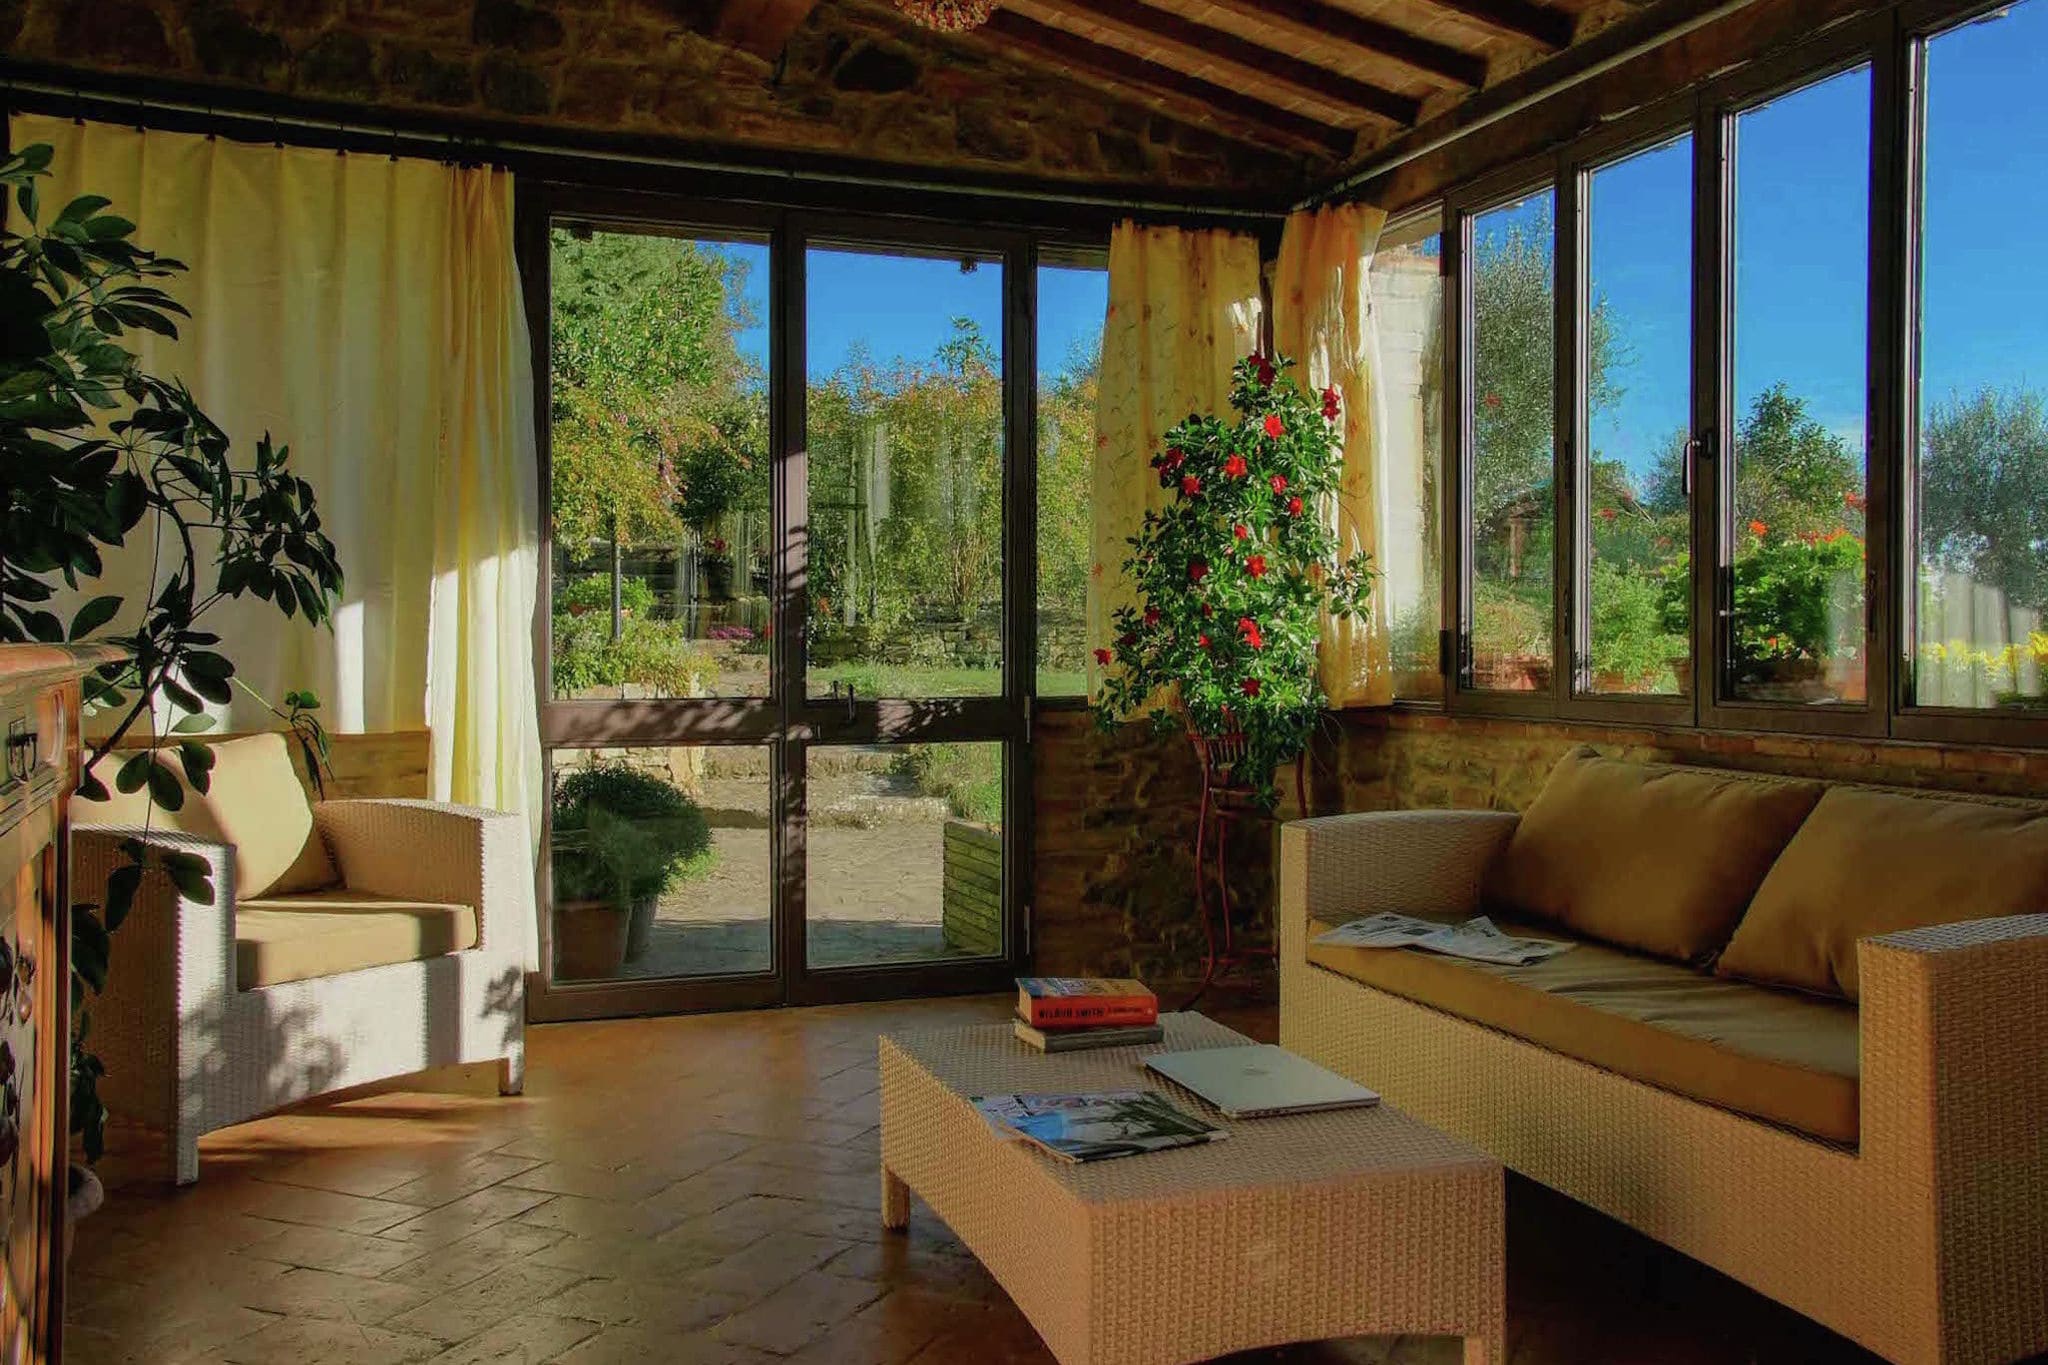 Rural villa with heated pool, large terrace and beautiful views